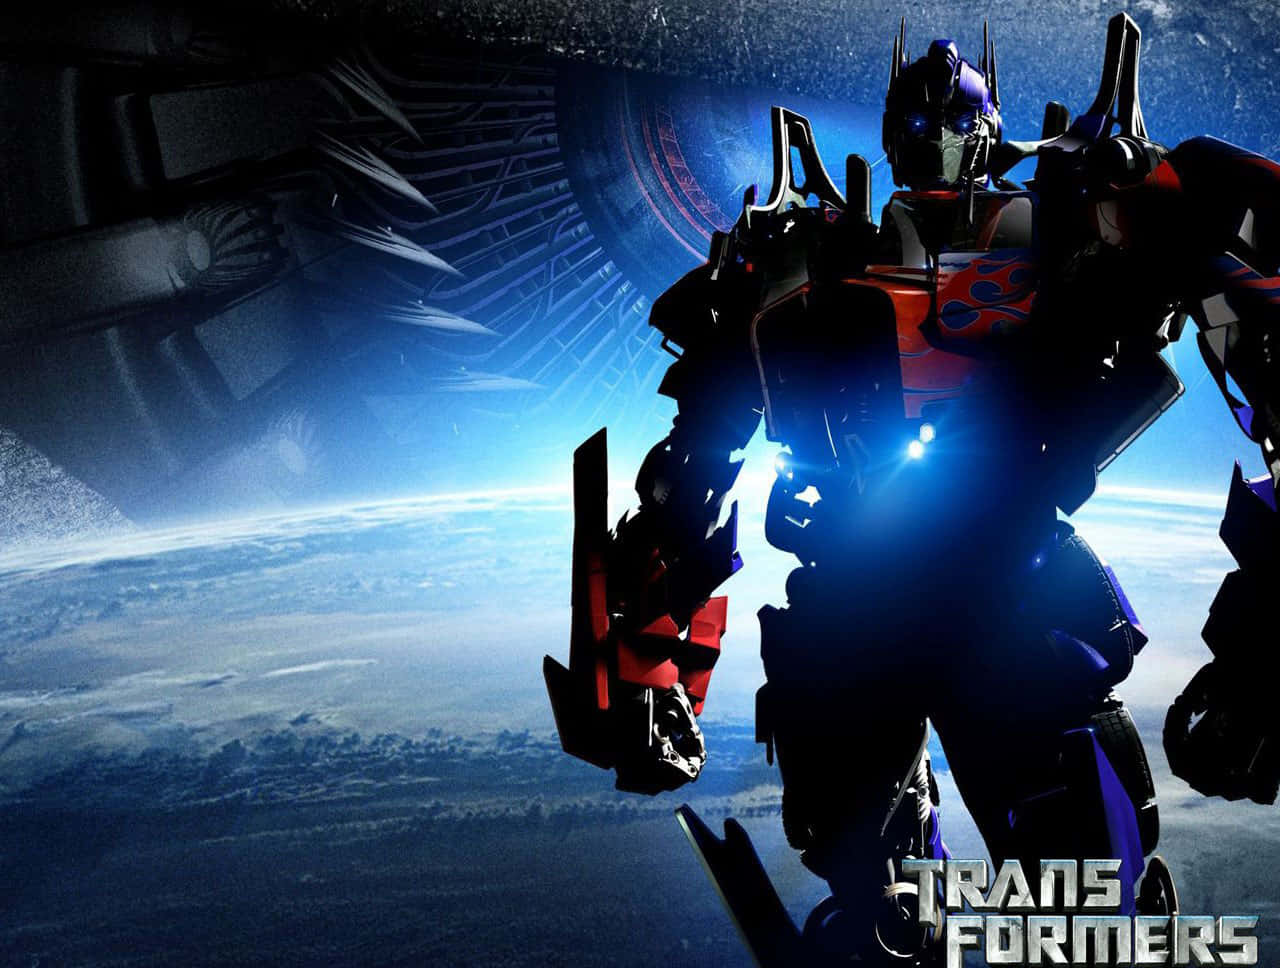 Optimus Prime Leads the Autobots in a Battle